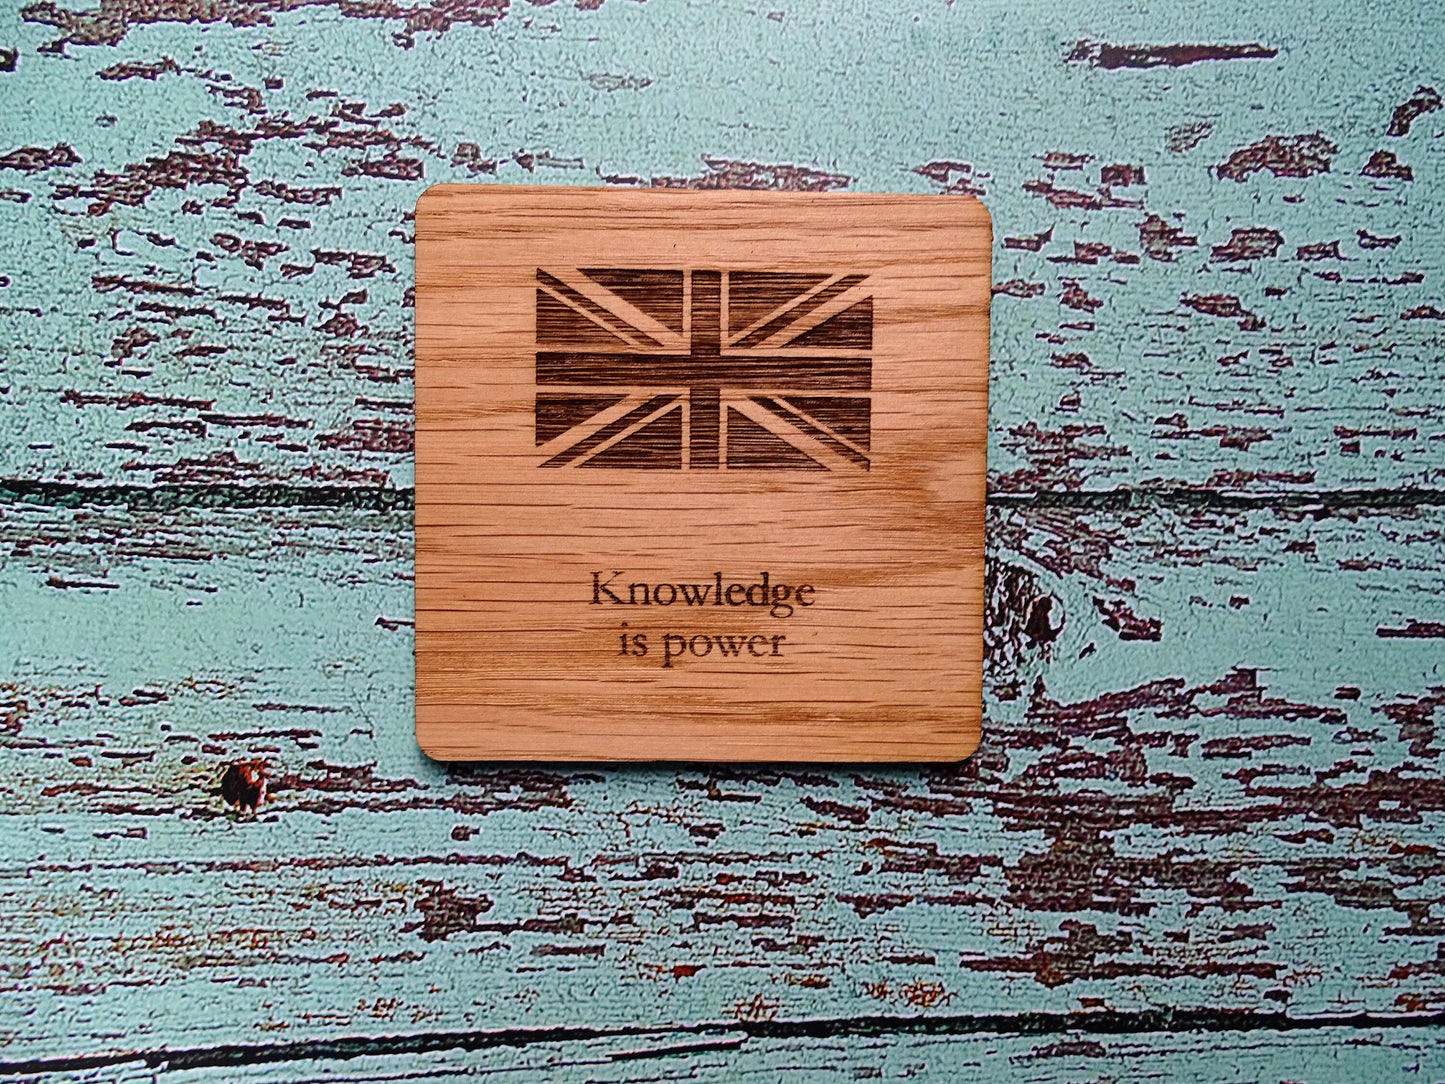 Wooden Coasters With English Proverbs, British Gift, Oak Coasters